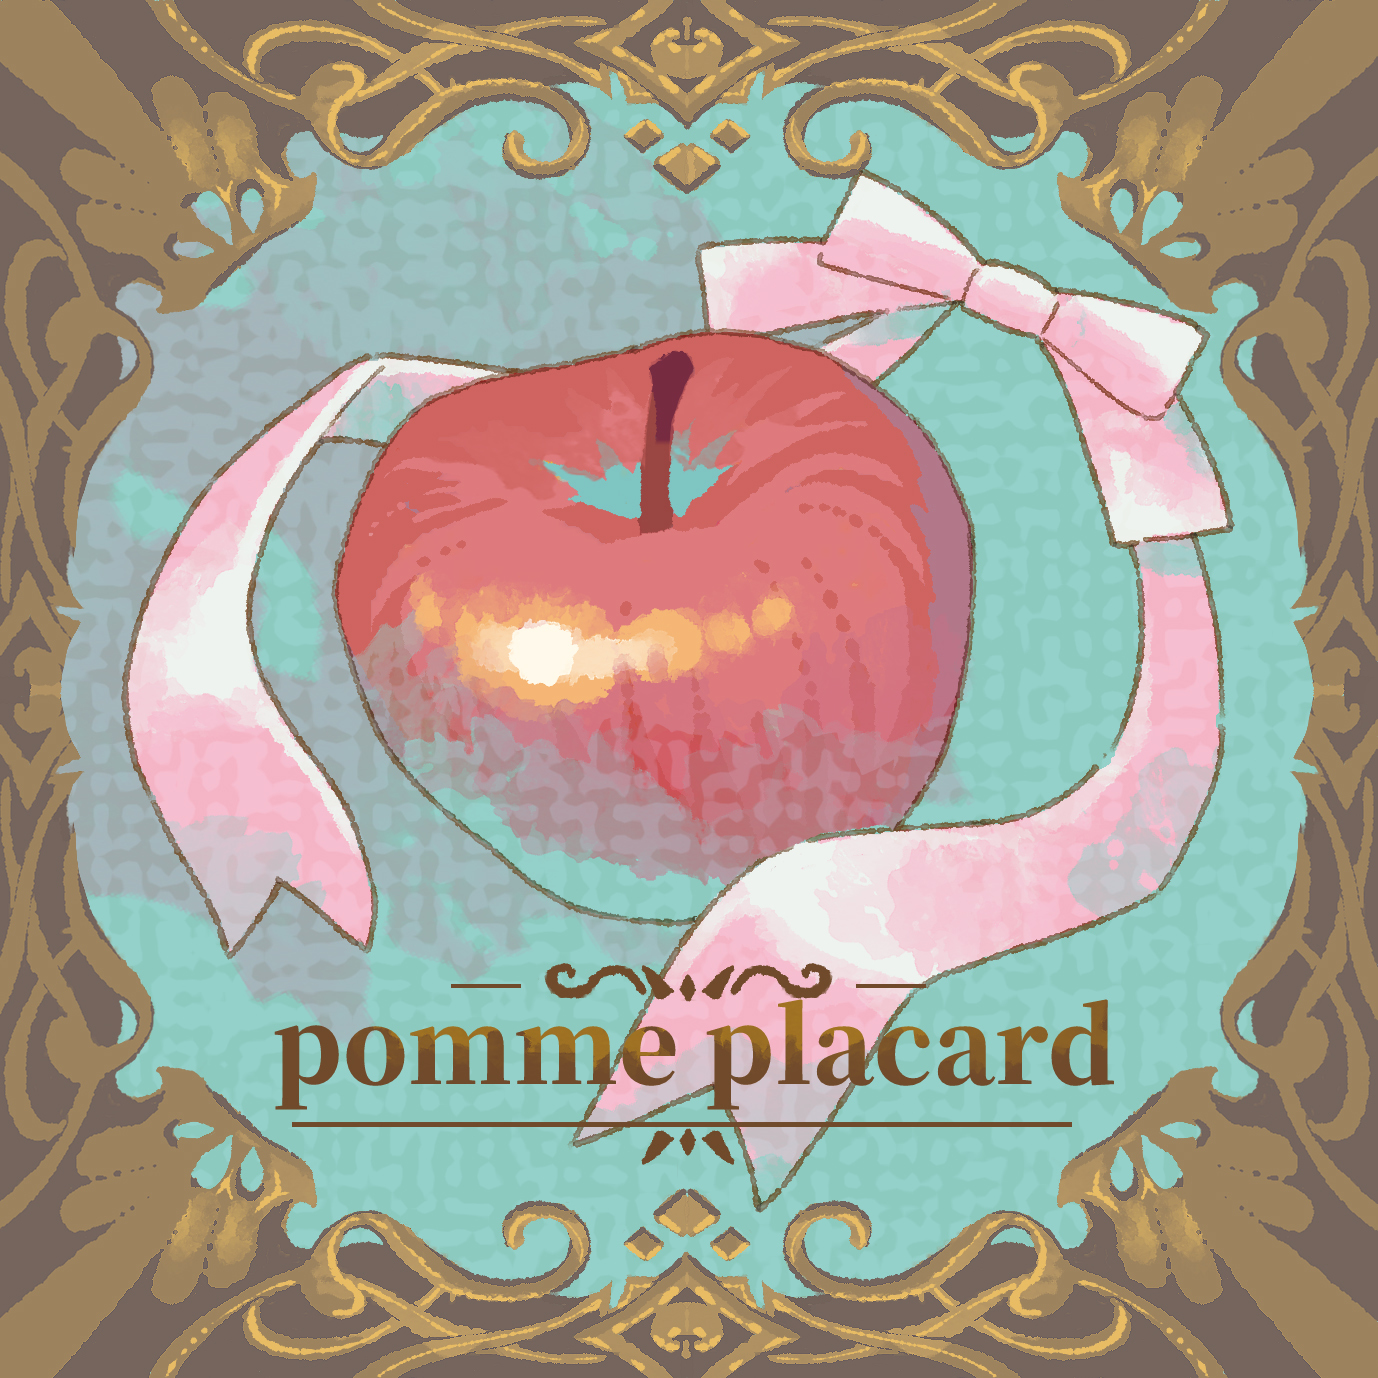 pomme placard